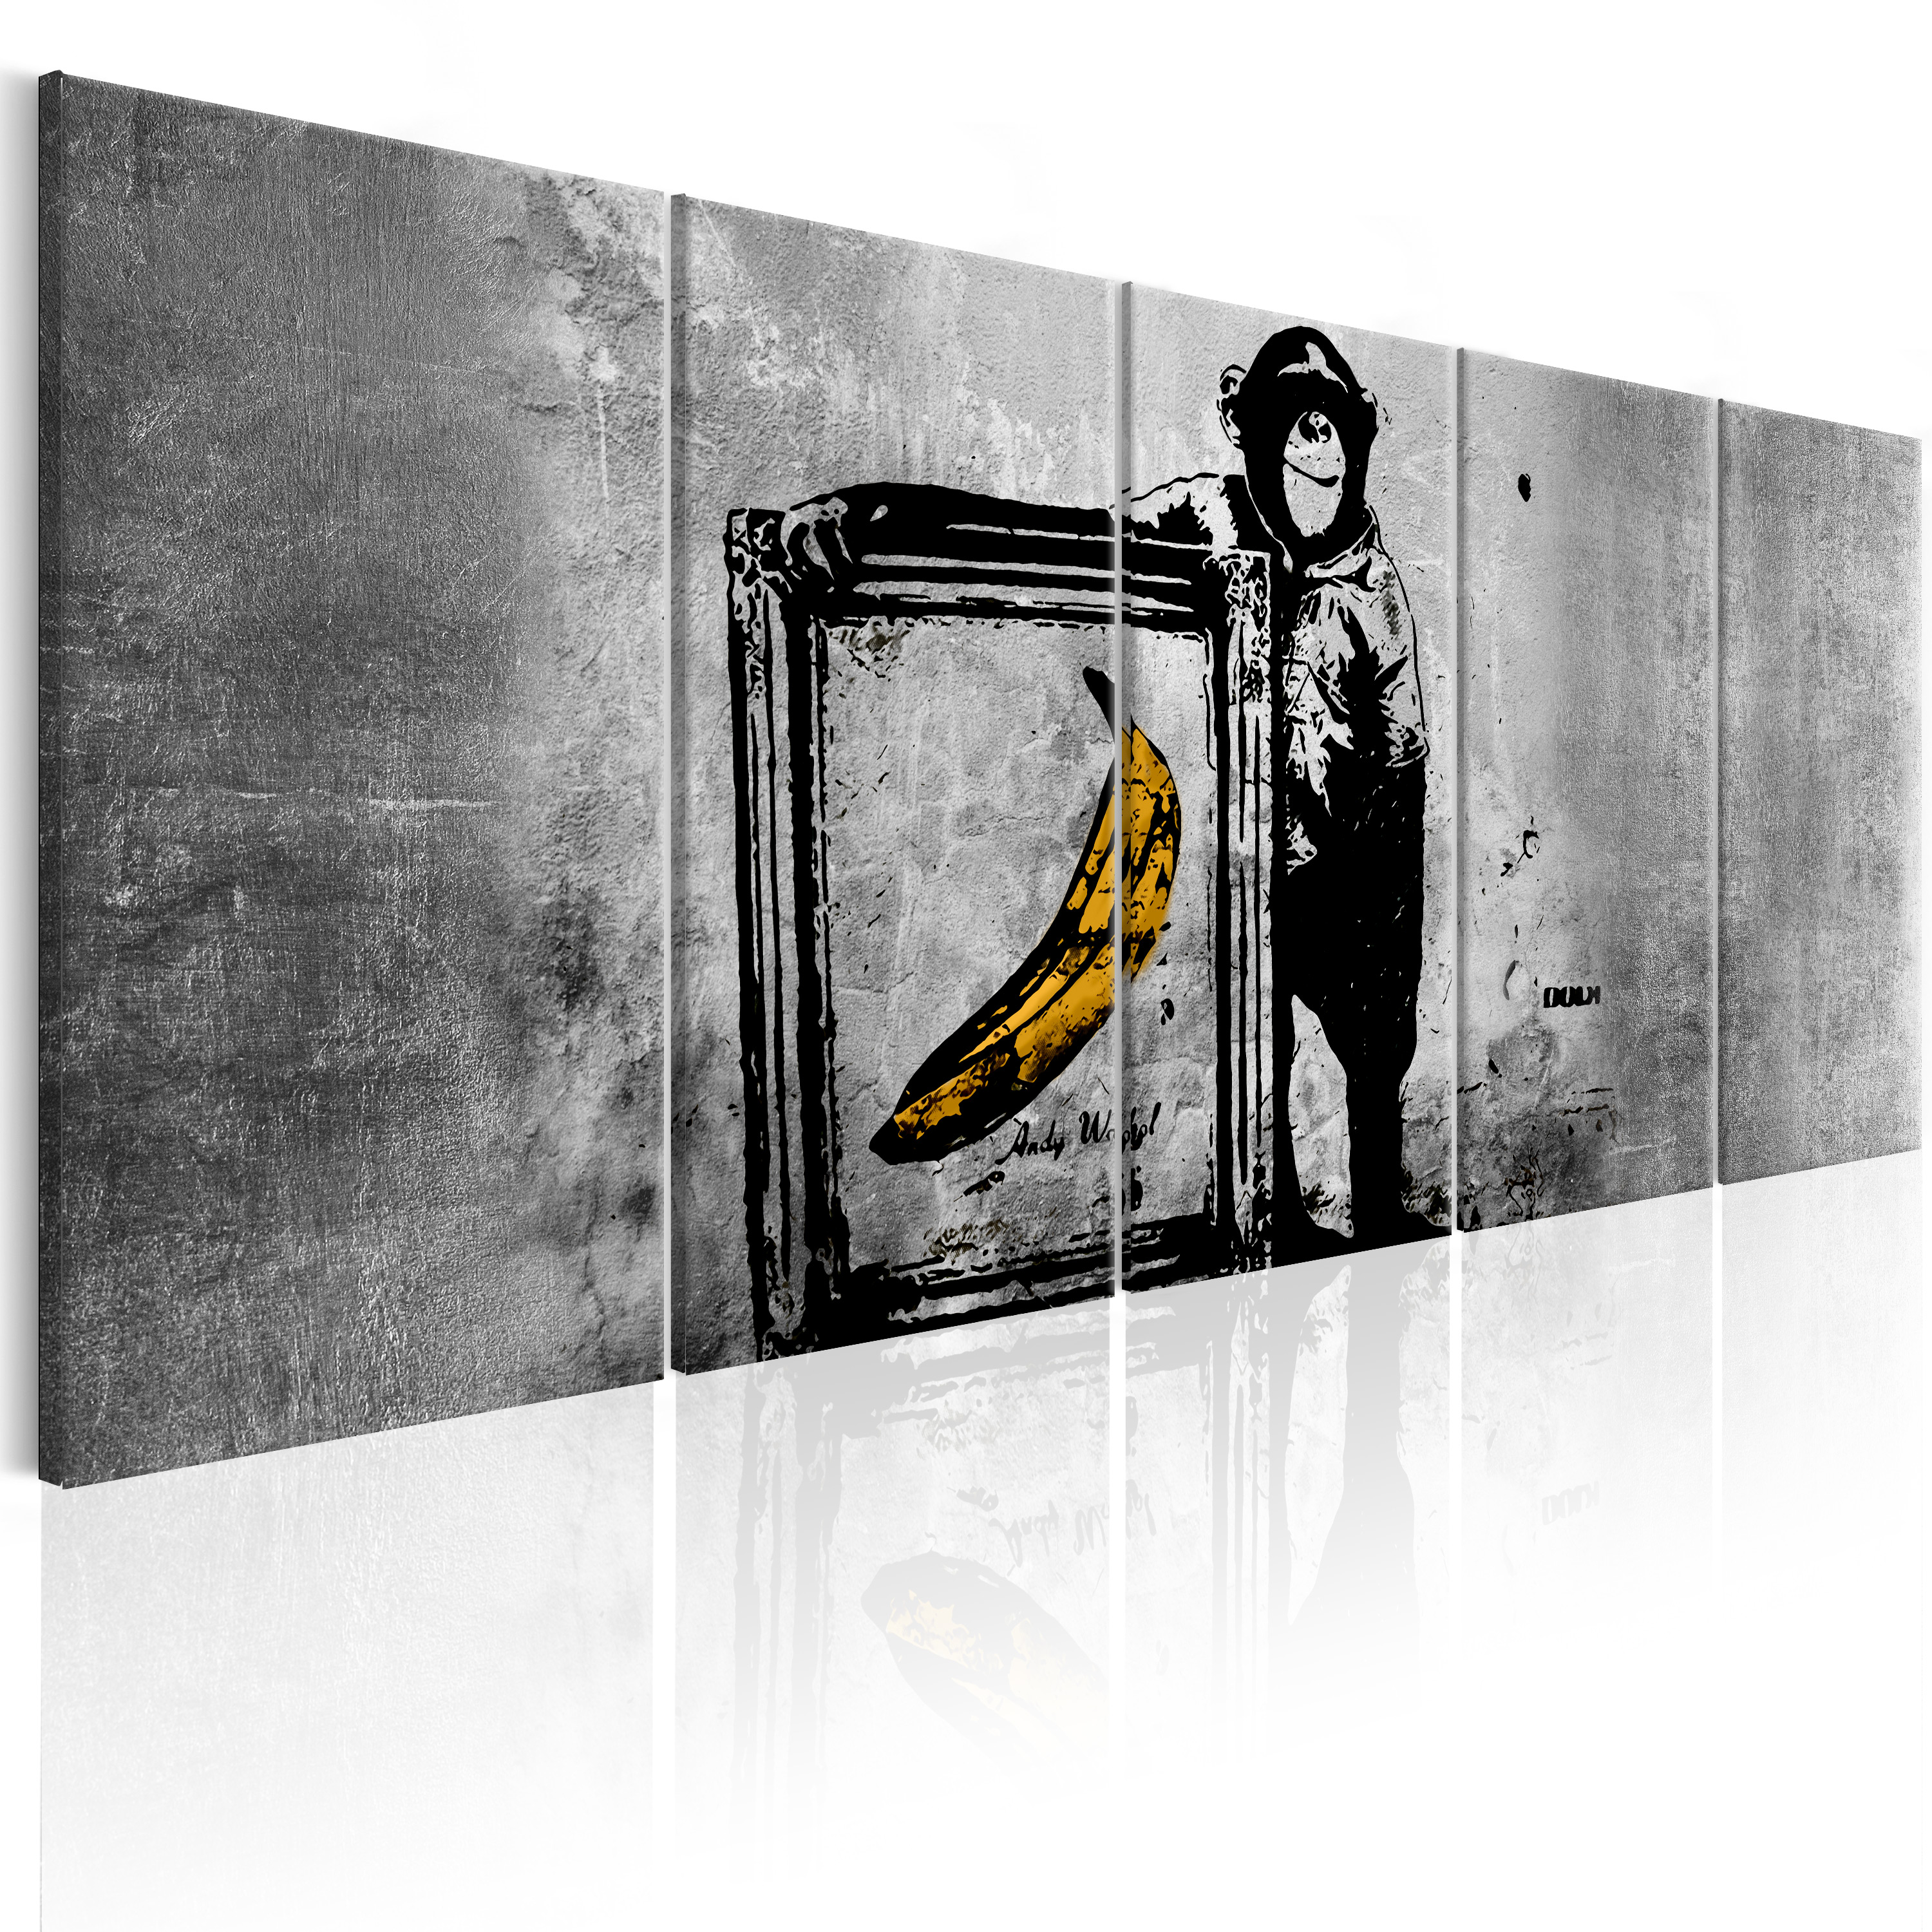 Banksy Painting on Canvas TNT Prints images Mural Paintings Modern i-c-0104-b-m 